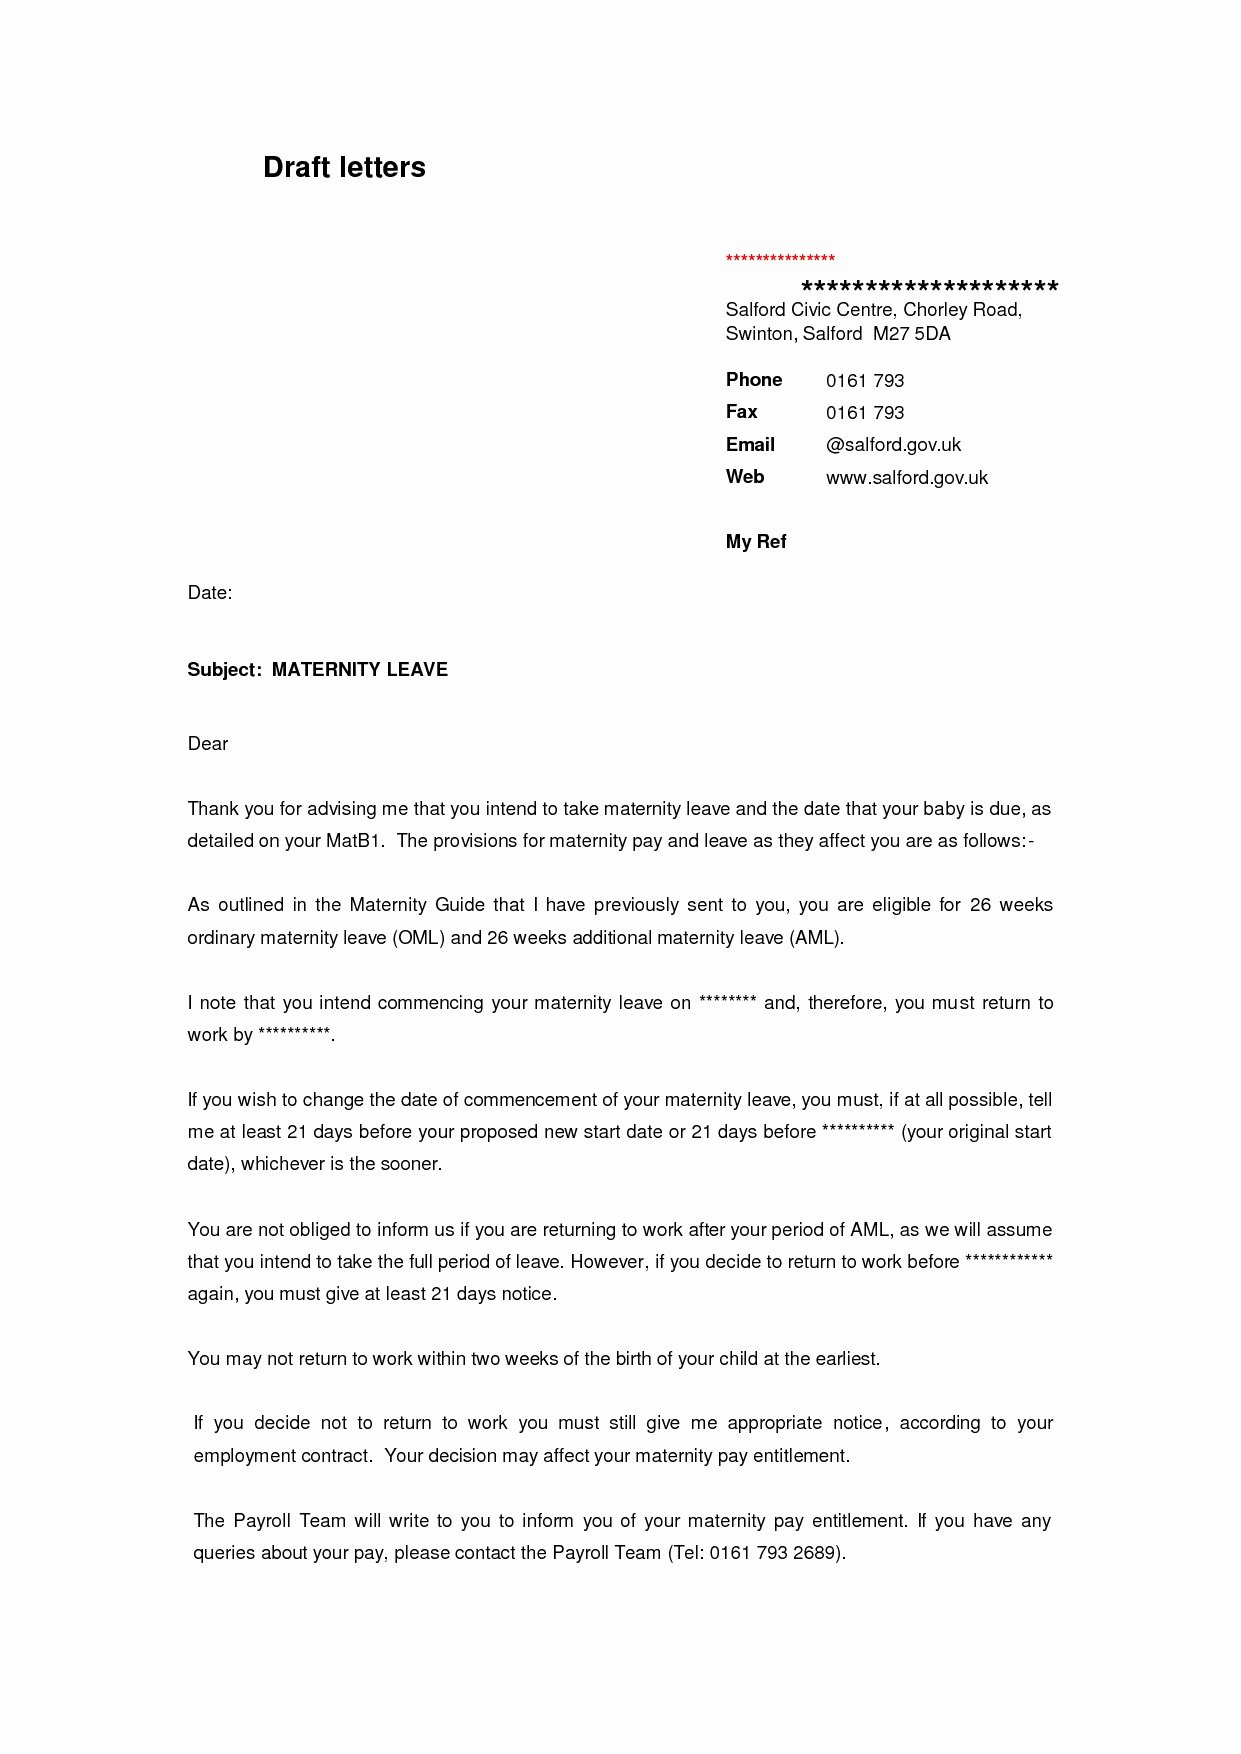 Maternity Leave Resignation Letter Awesome Resignation Letter after Maternity Leave with Holiday Pay